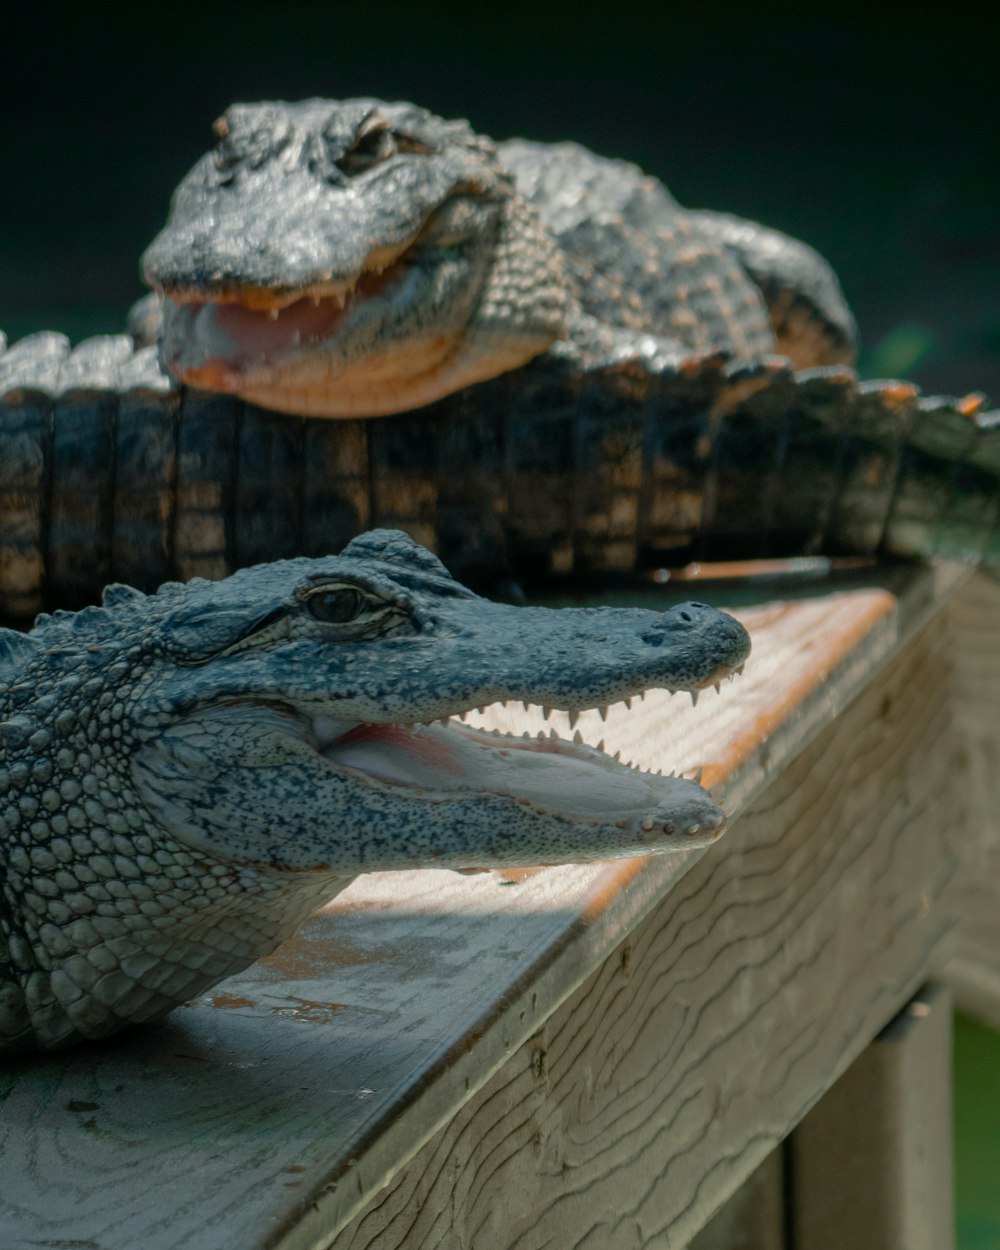 two alligators are sitting on a wooden ledge